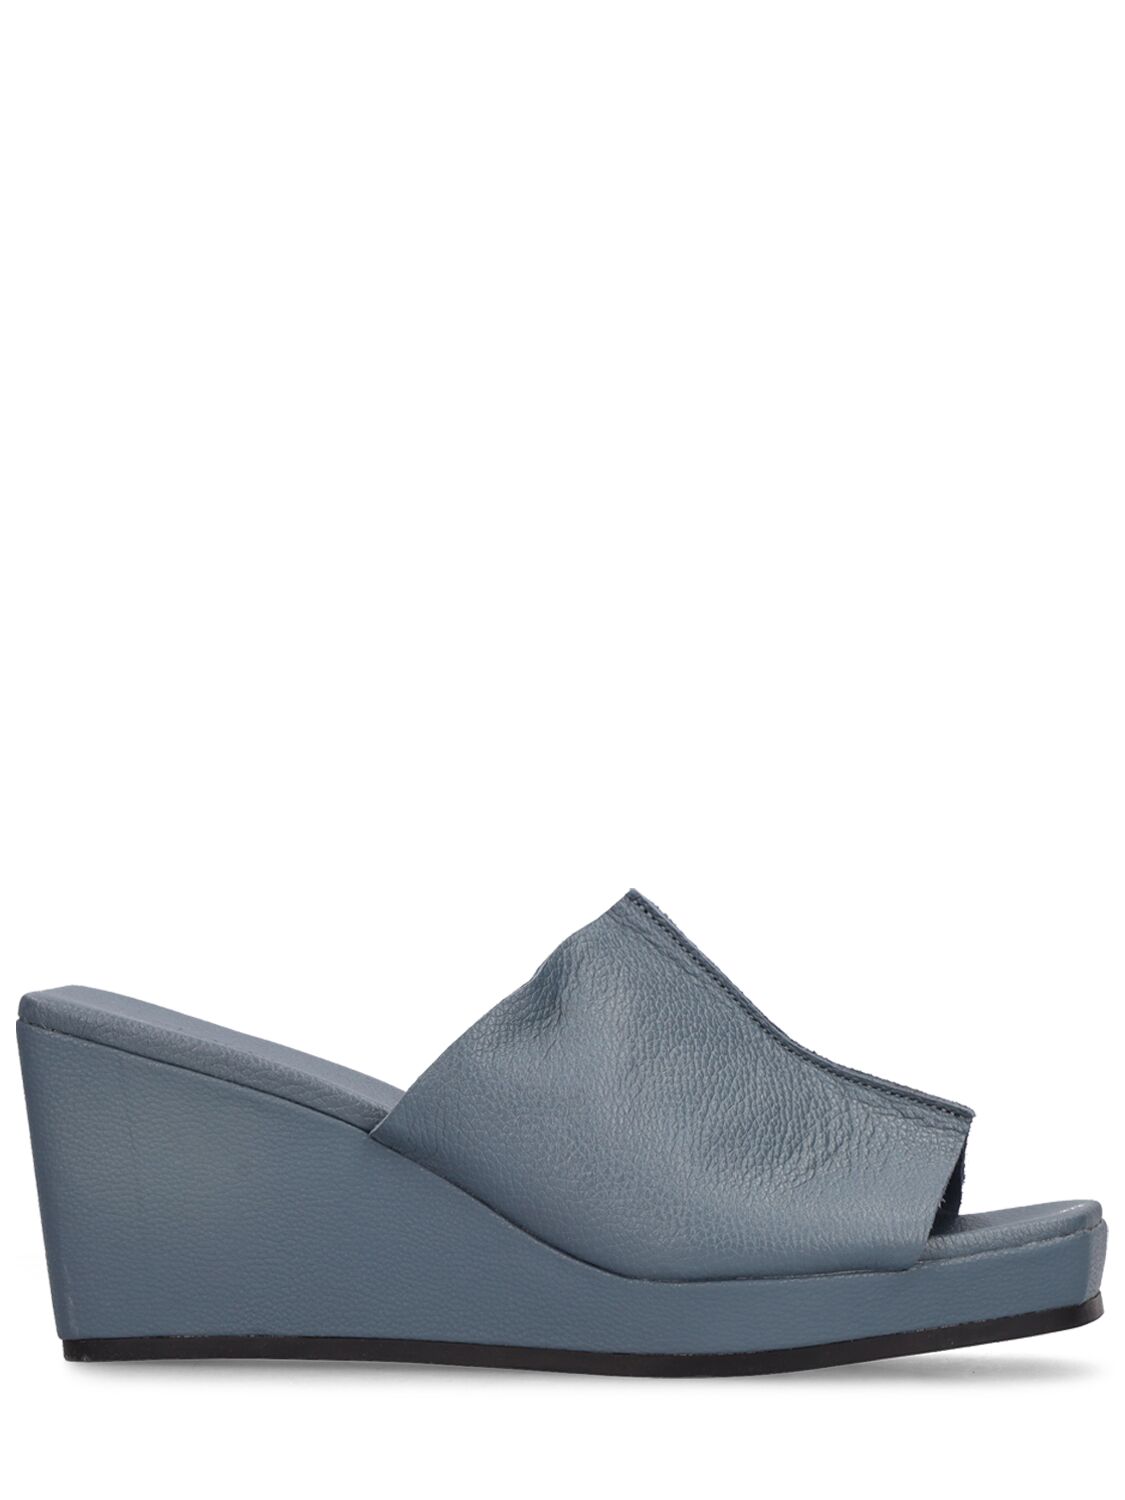 St.agni 80mm Maria Leather Wedges In Blue